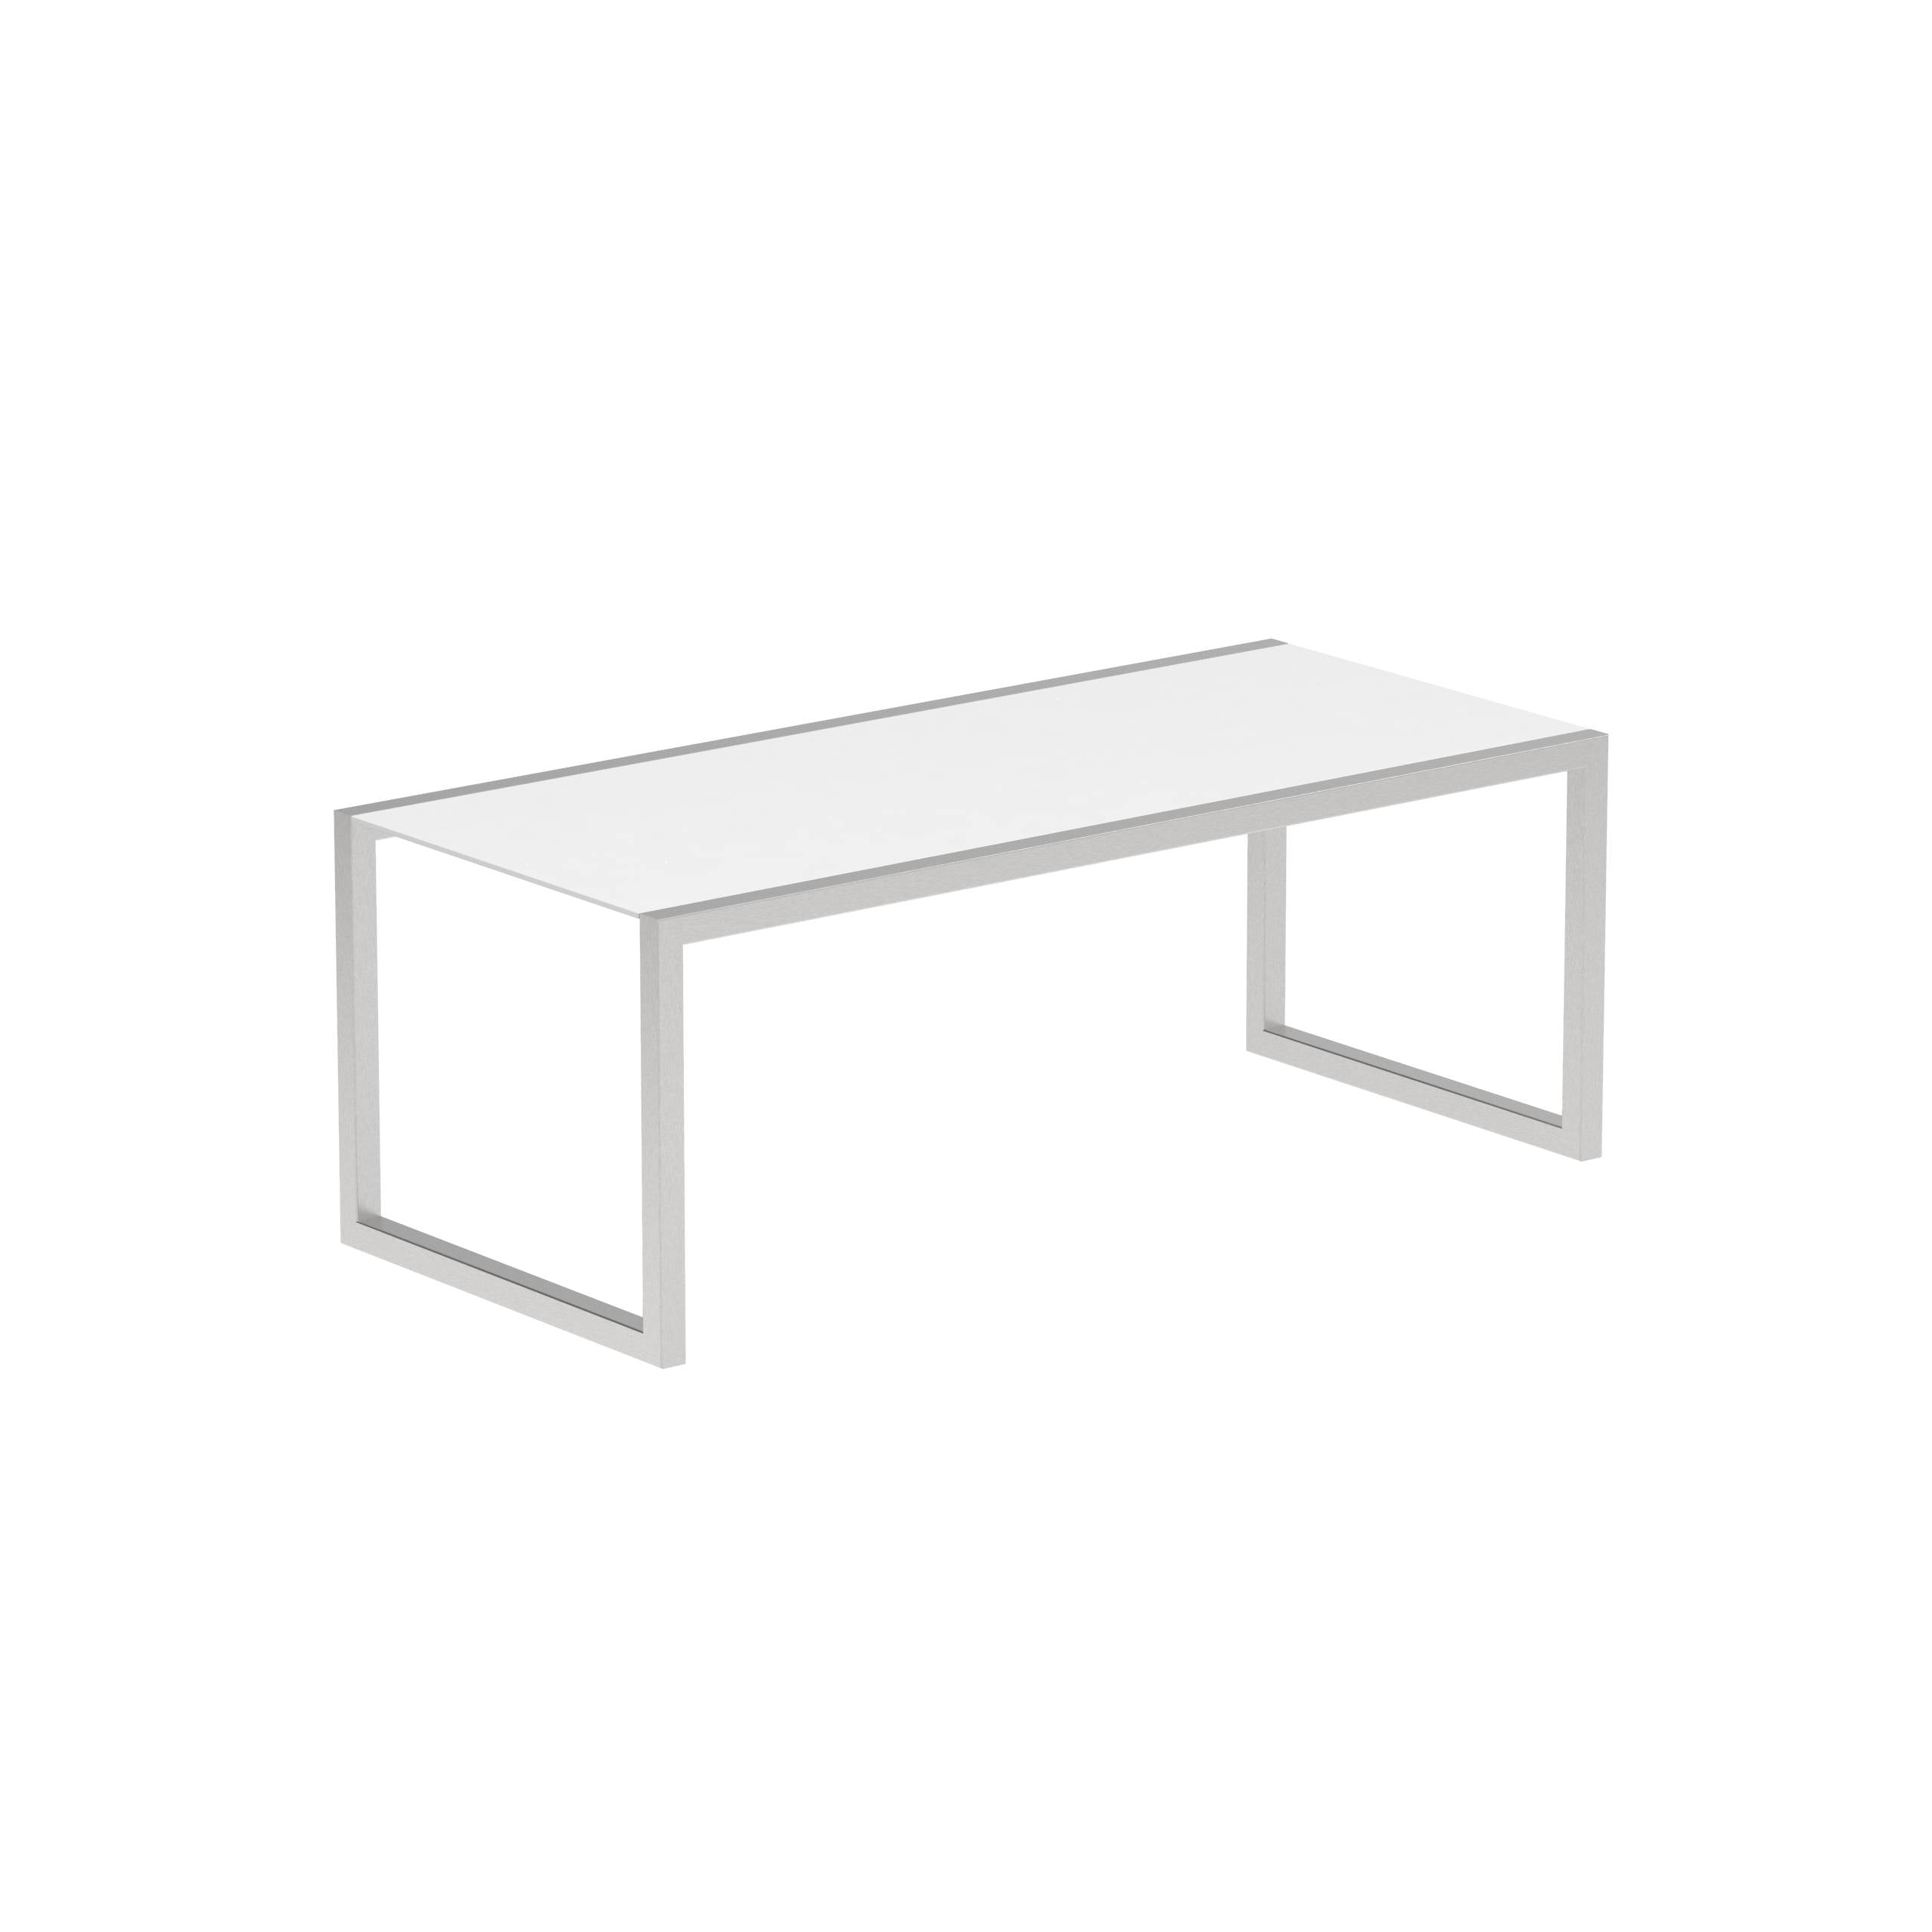 Ninix Table 200x90cm With Stainless Steel And Ceramic White